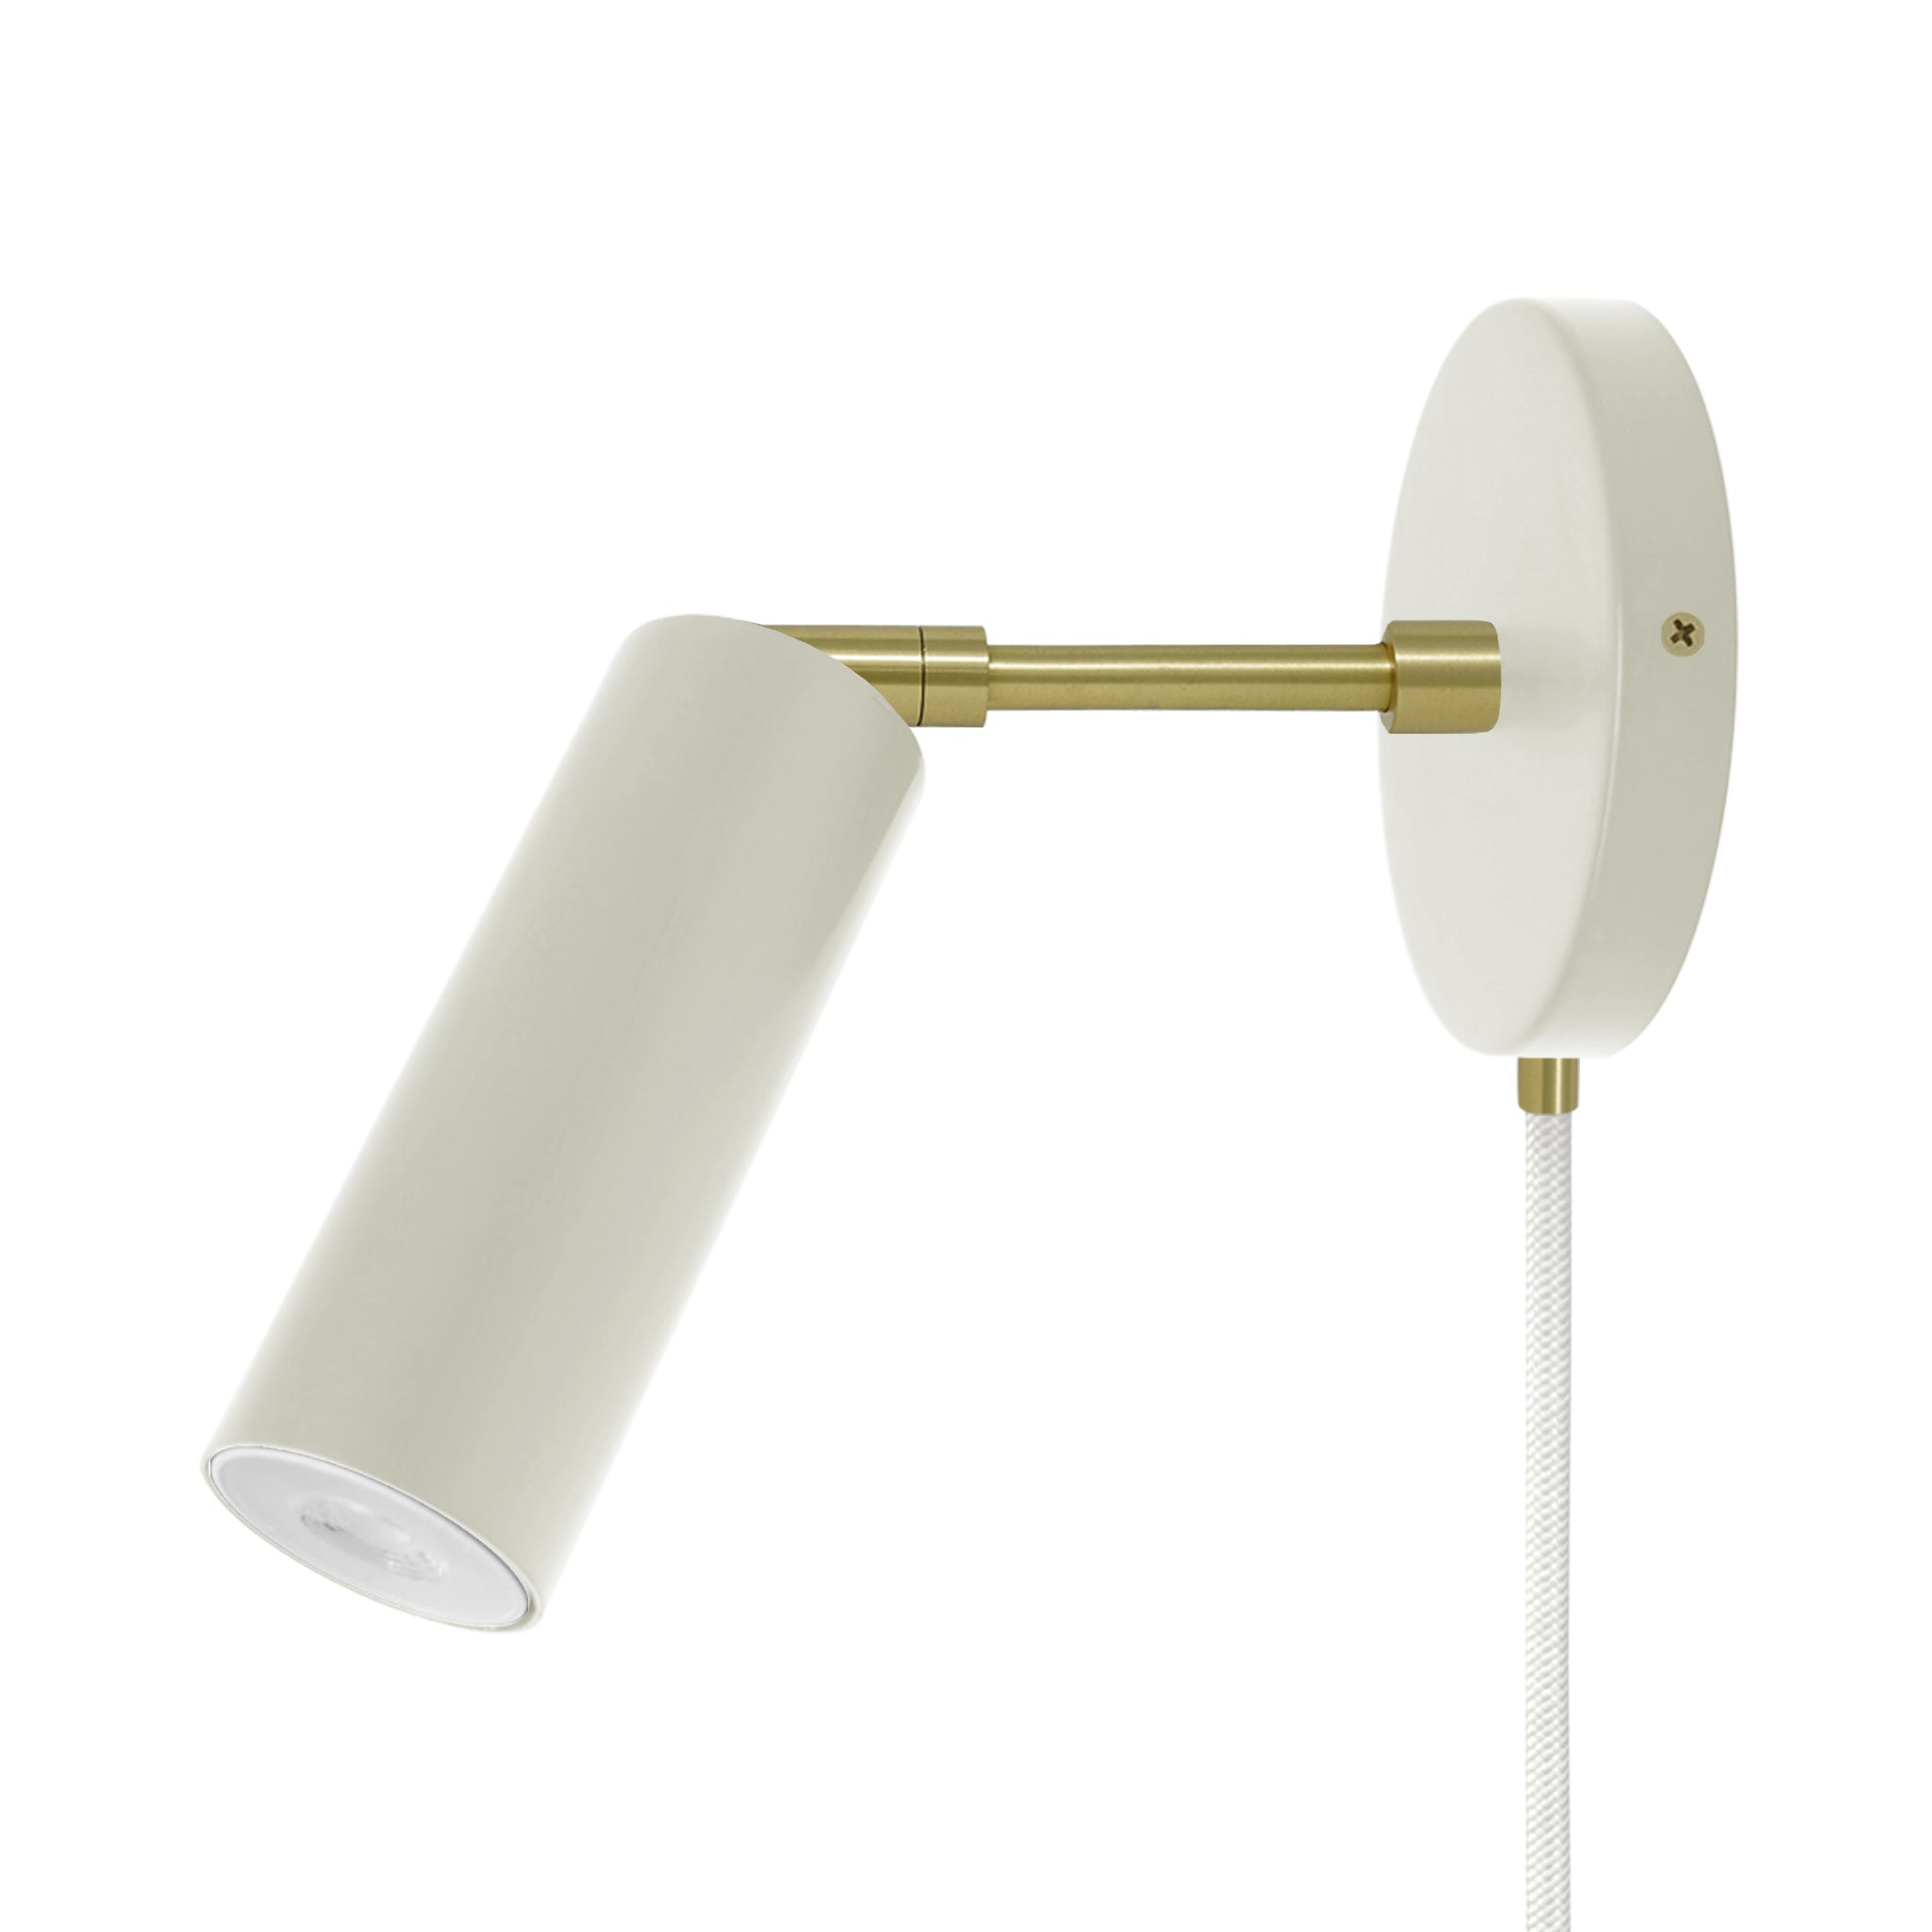 Brass and bone color Reader plug-in sconce 3" arm Dutton Brown lighting